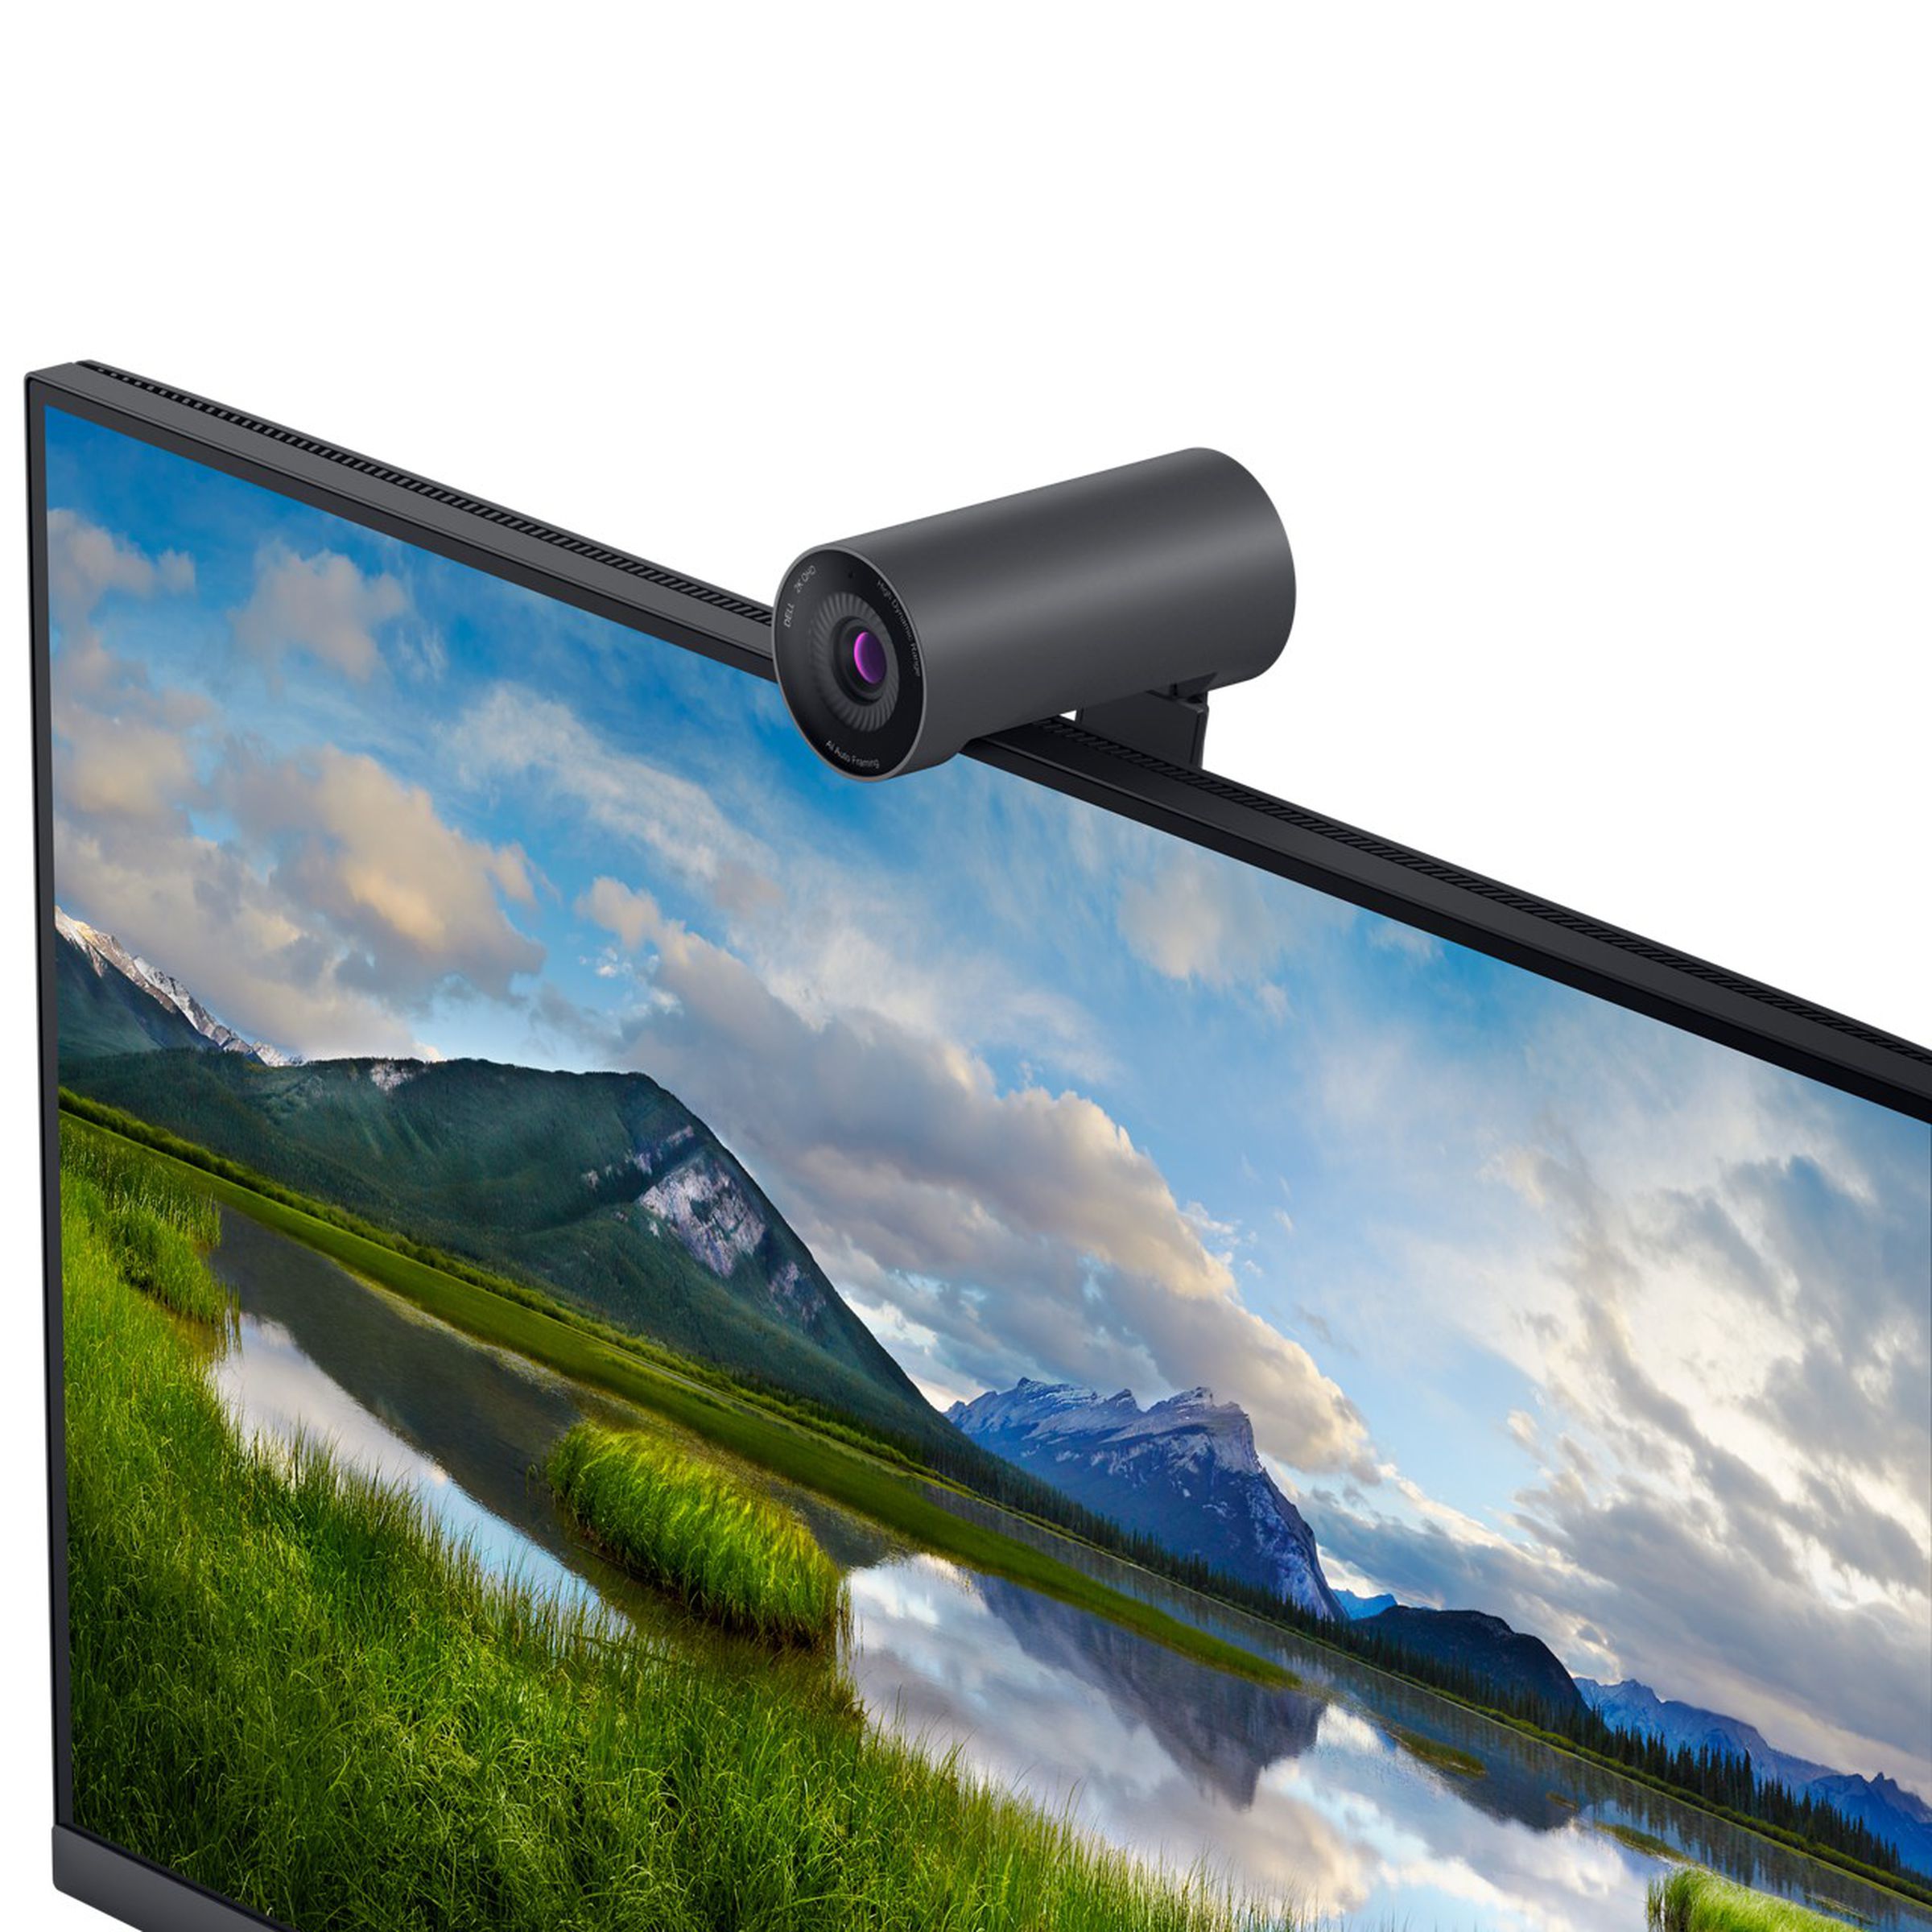 The Dell Pro Webcam WB5023 has an integrated universal mounting clip and comes with a magnetic lens cap.